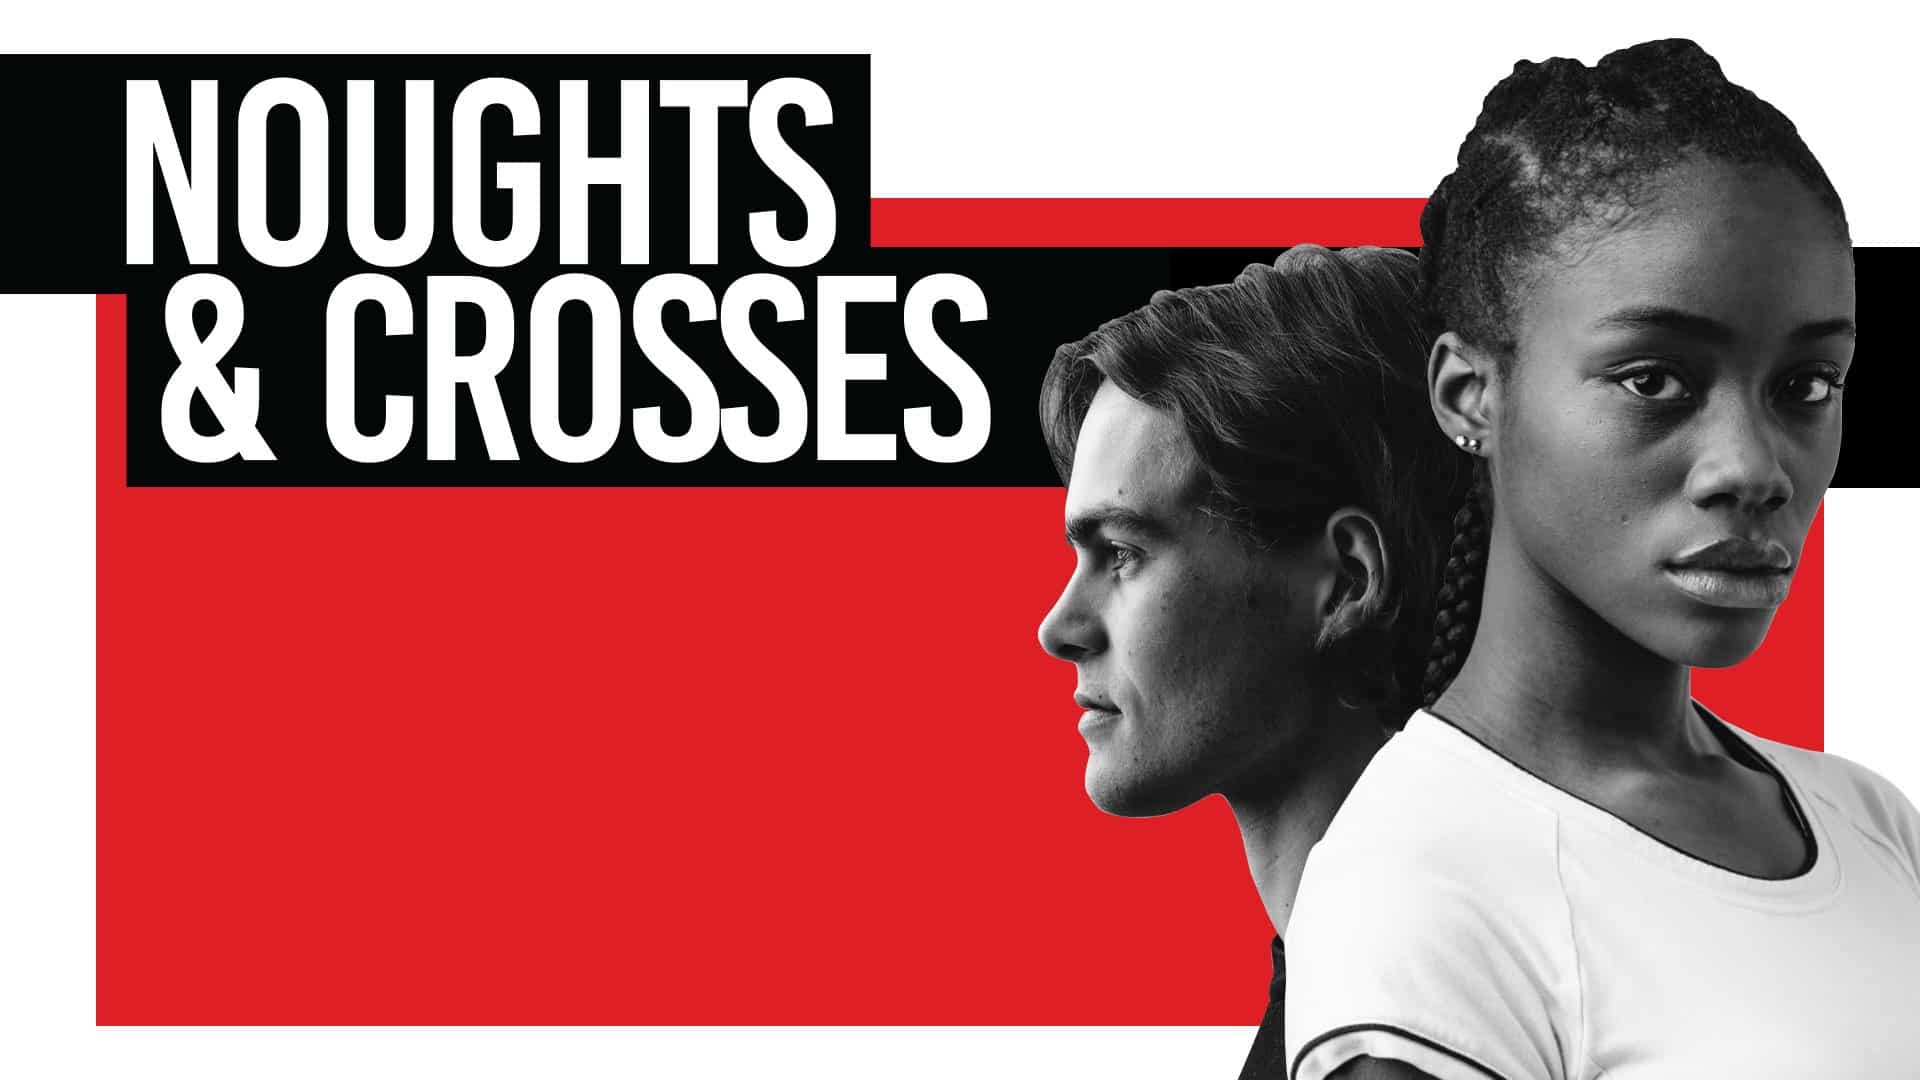 Noughts & Crosses artwork - eather Agyepong (Sephy) and Billy Harris (Callum) stand back to back against a red square. Text reads 'Noughts & Crosses'